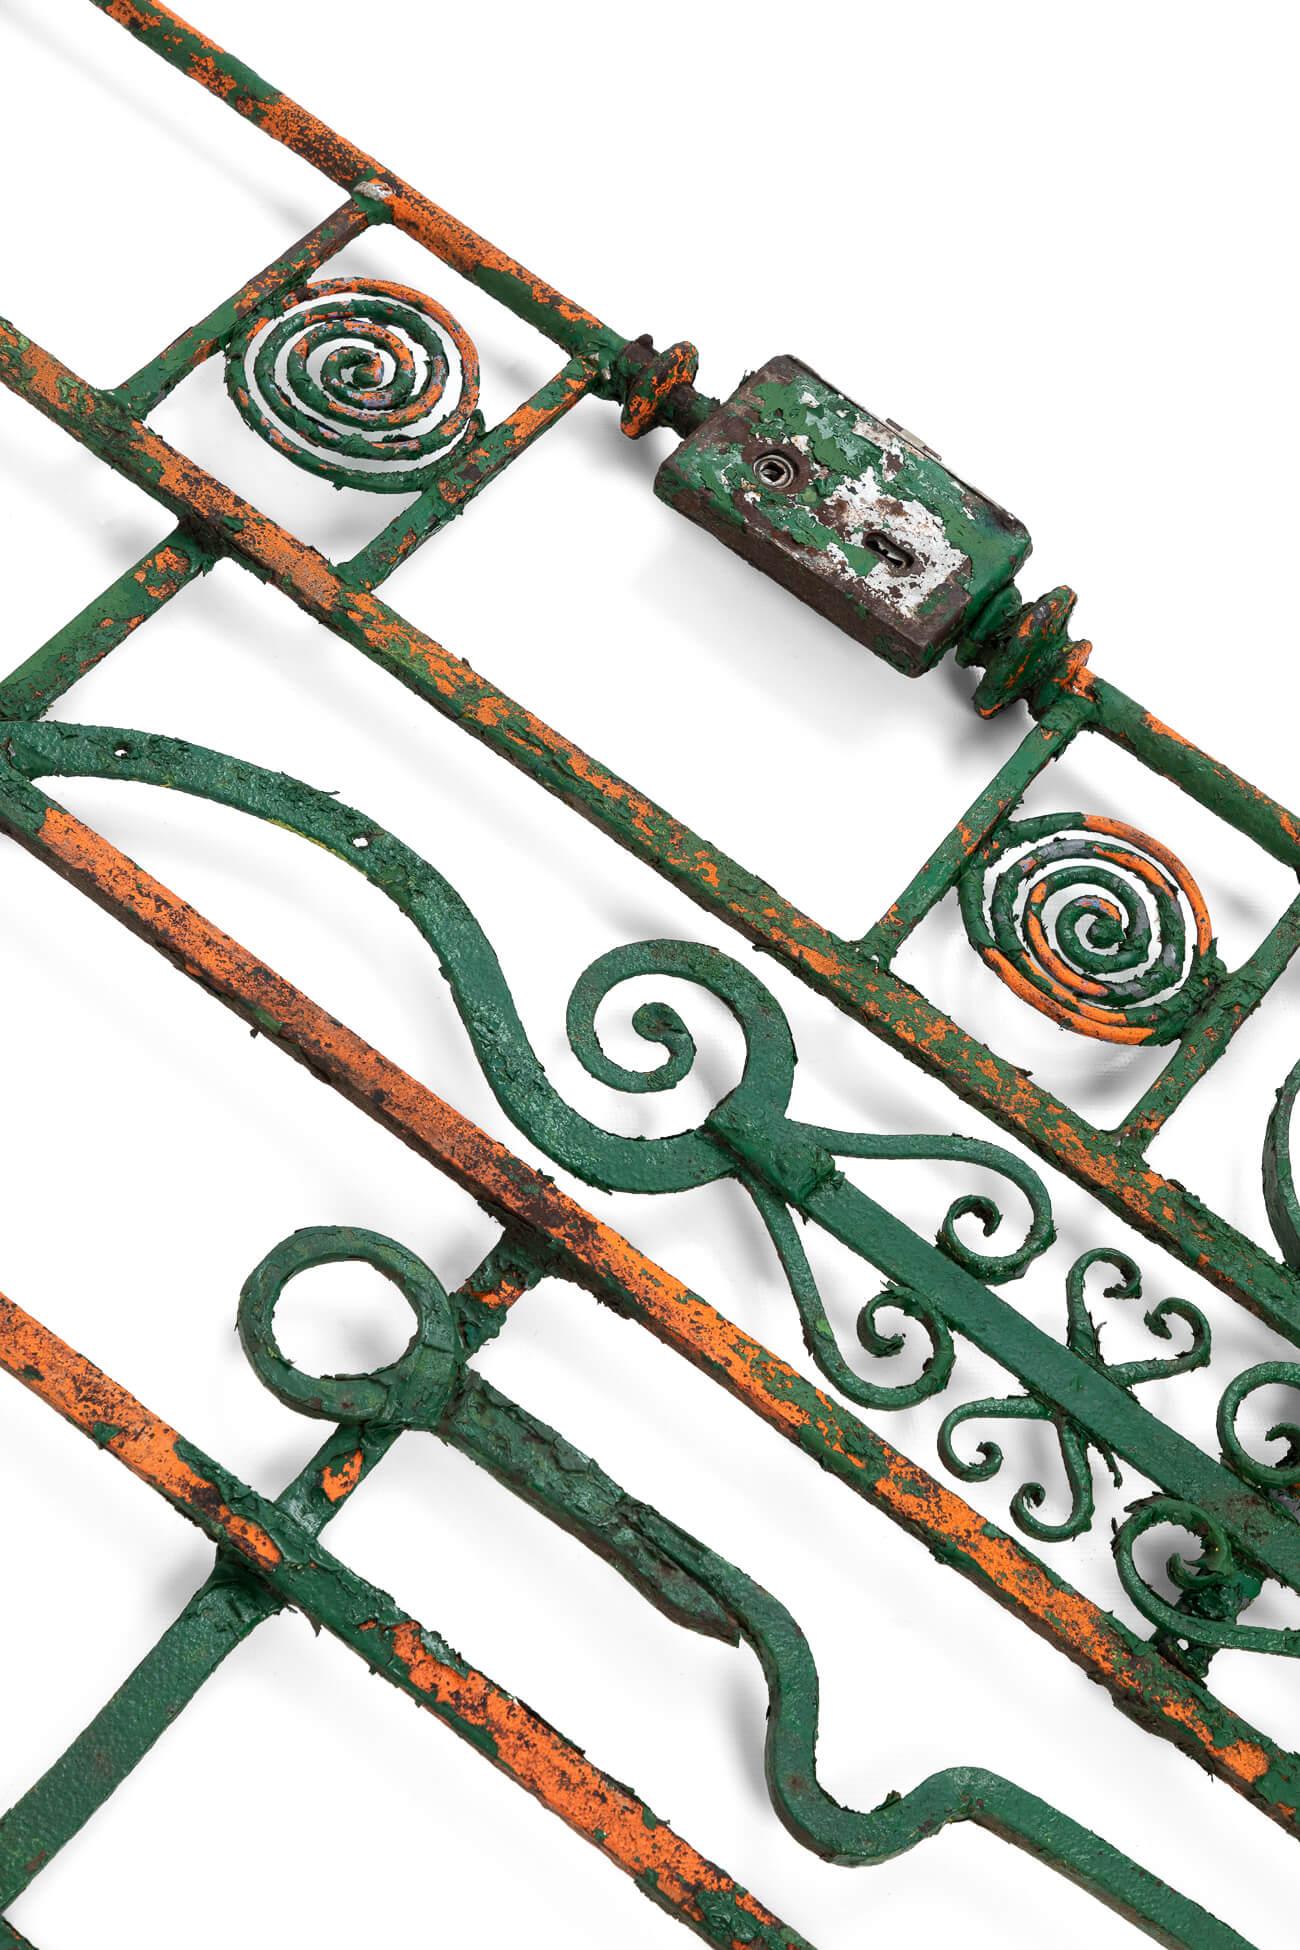 Industrial Pair of Antique Wrought Iron Gates in Original Flaky Paint, circa 1900